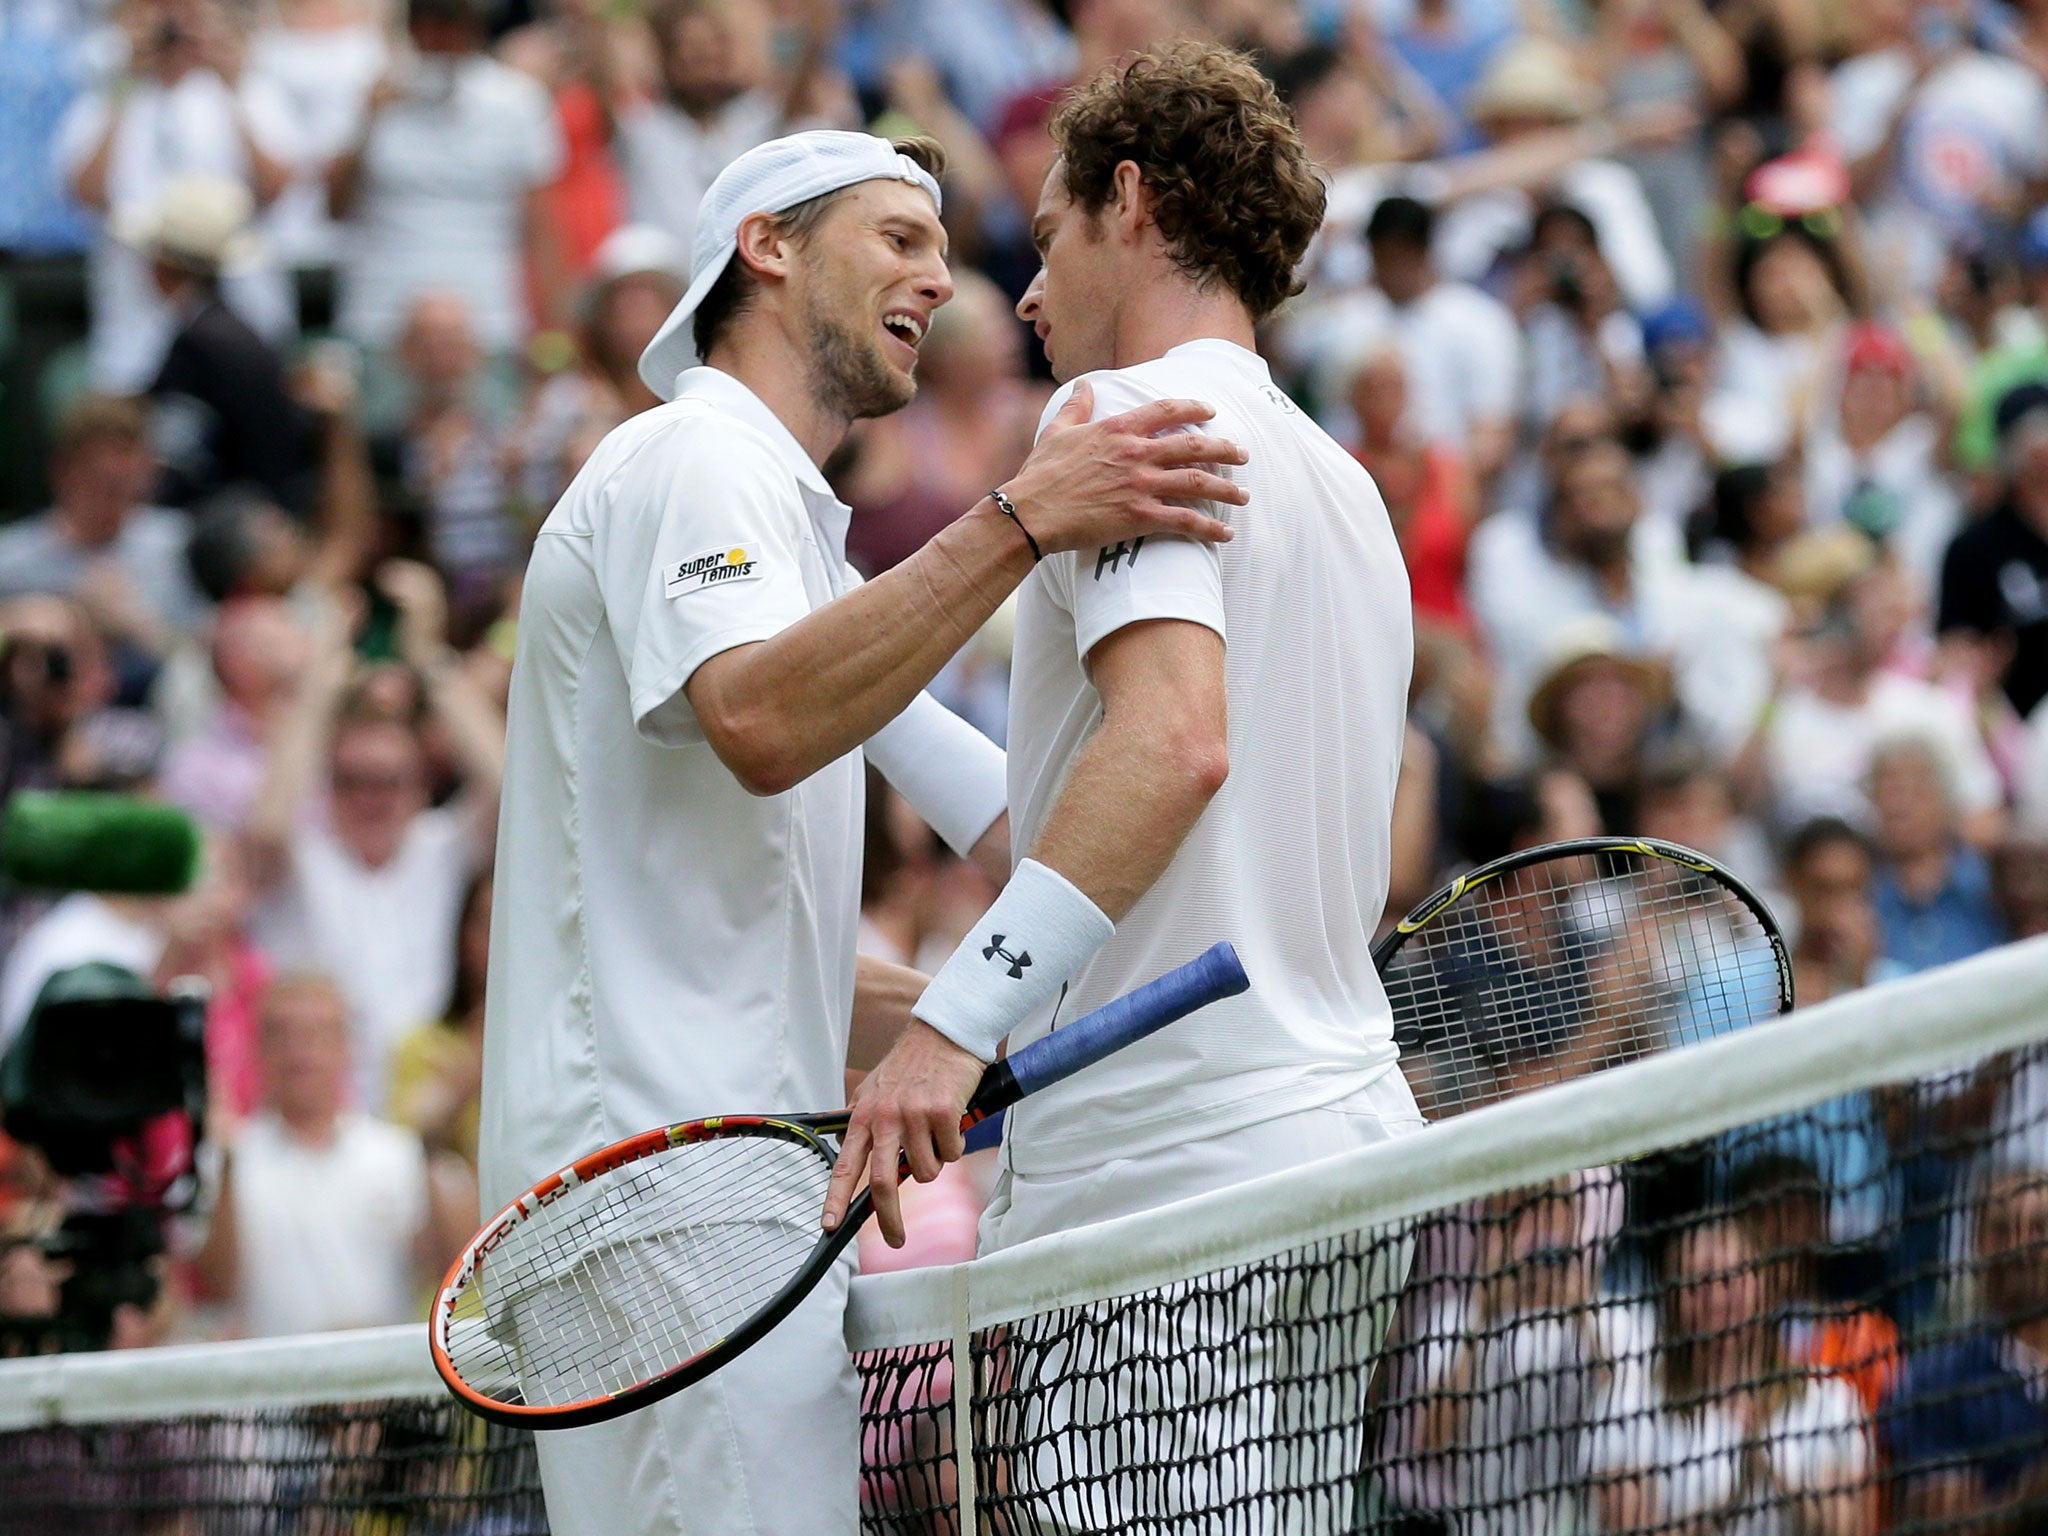 Andy Murray shakes hands after defeating Andreas Seppi of Italy in the third round of Wimbledon, Saturday 4 July, 2015